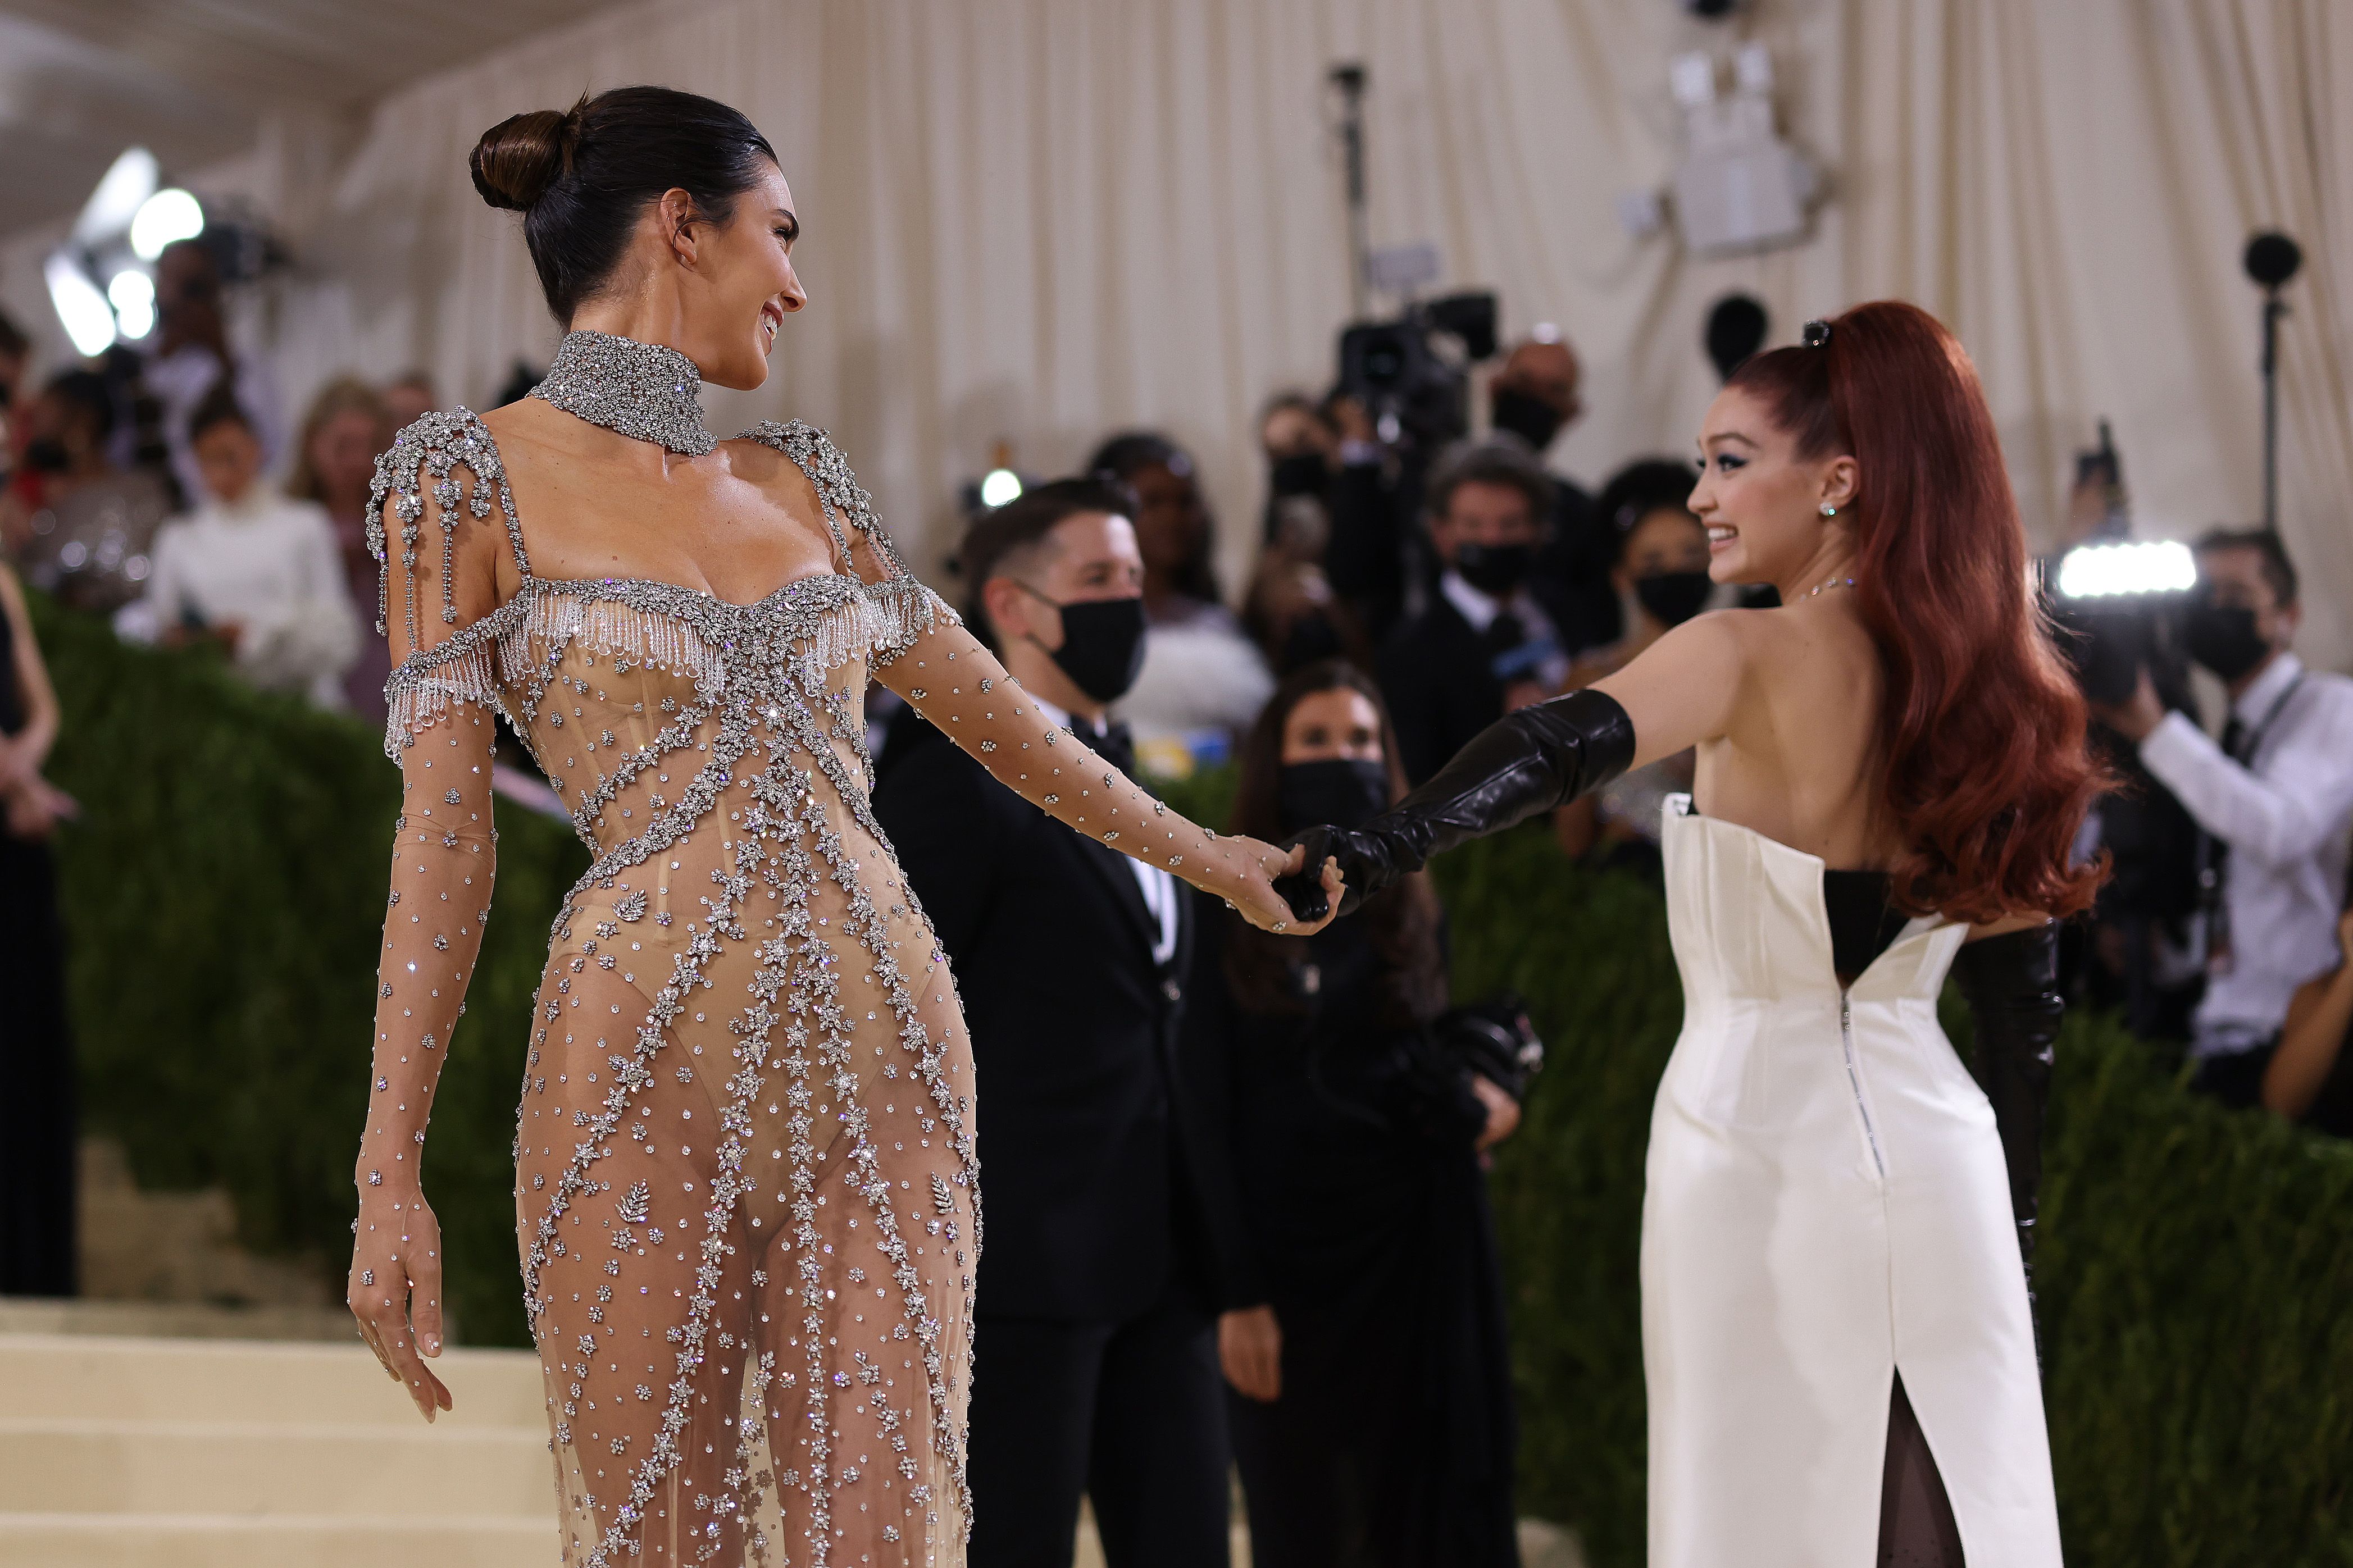 The Met Gala: Who Goes, Who Hosts, and Who Decides the Theme